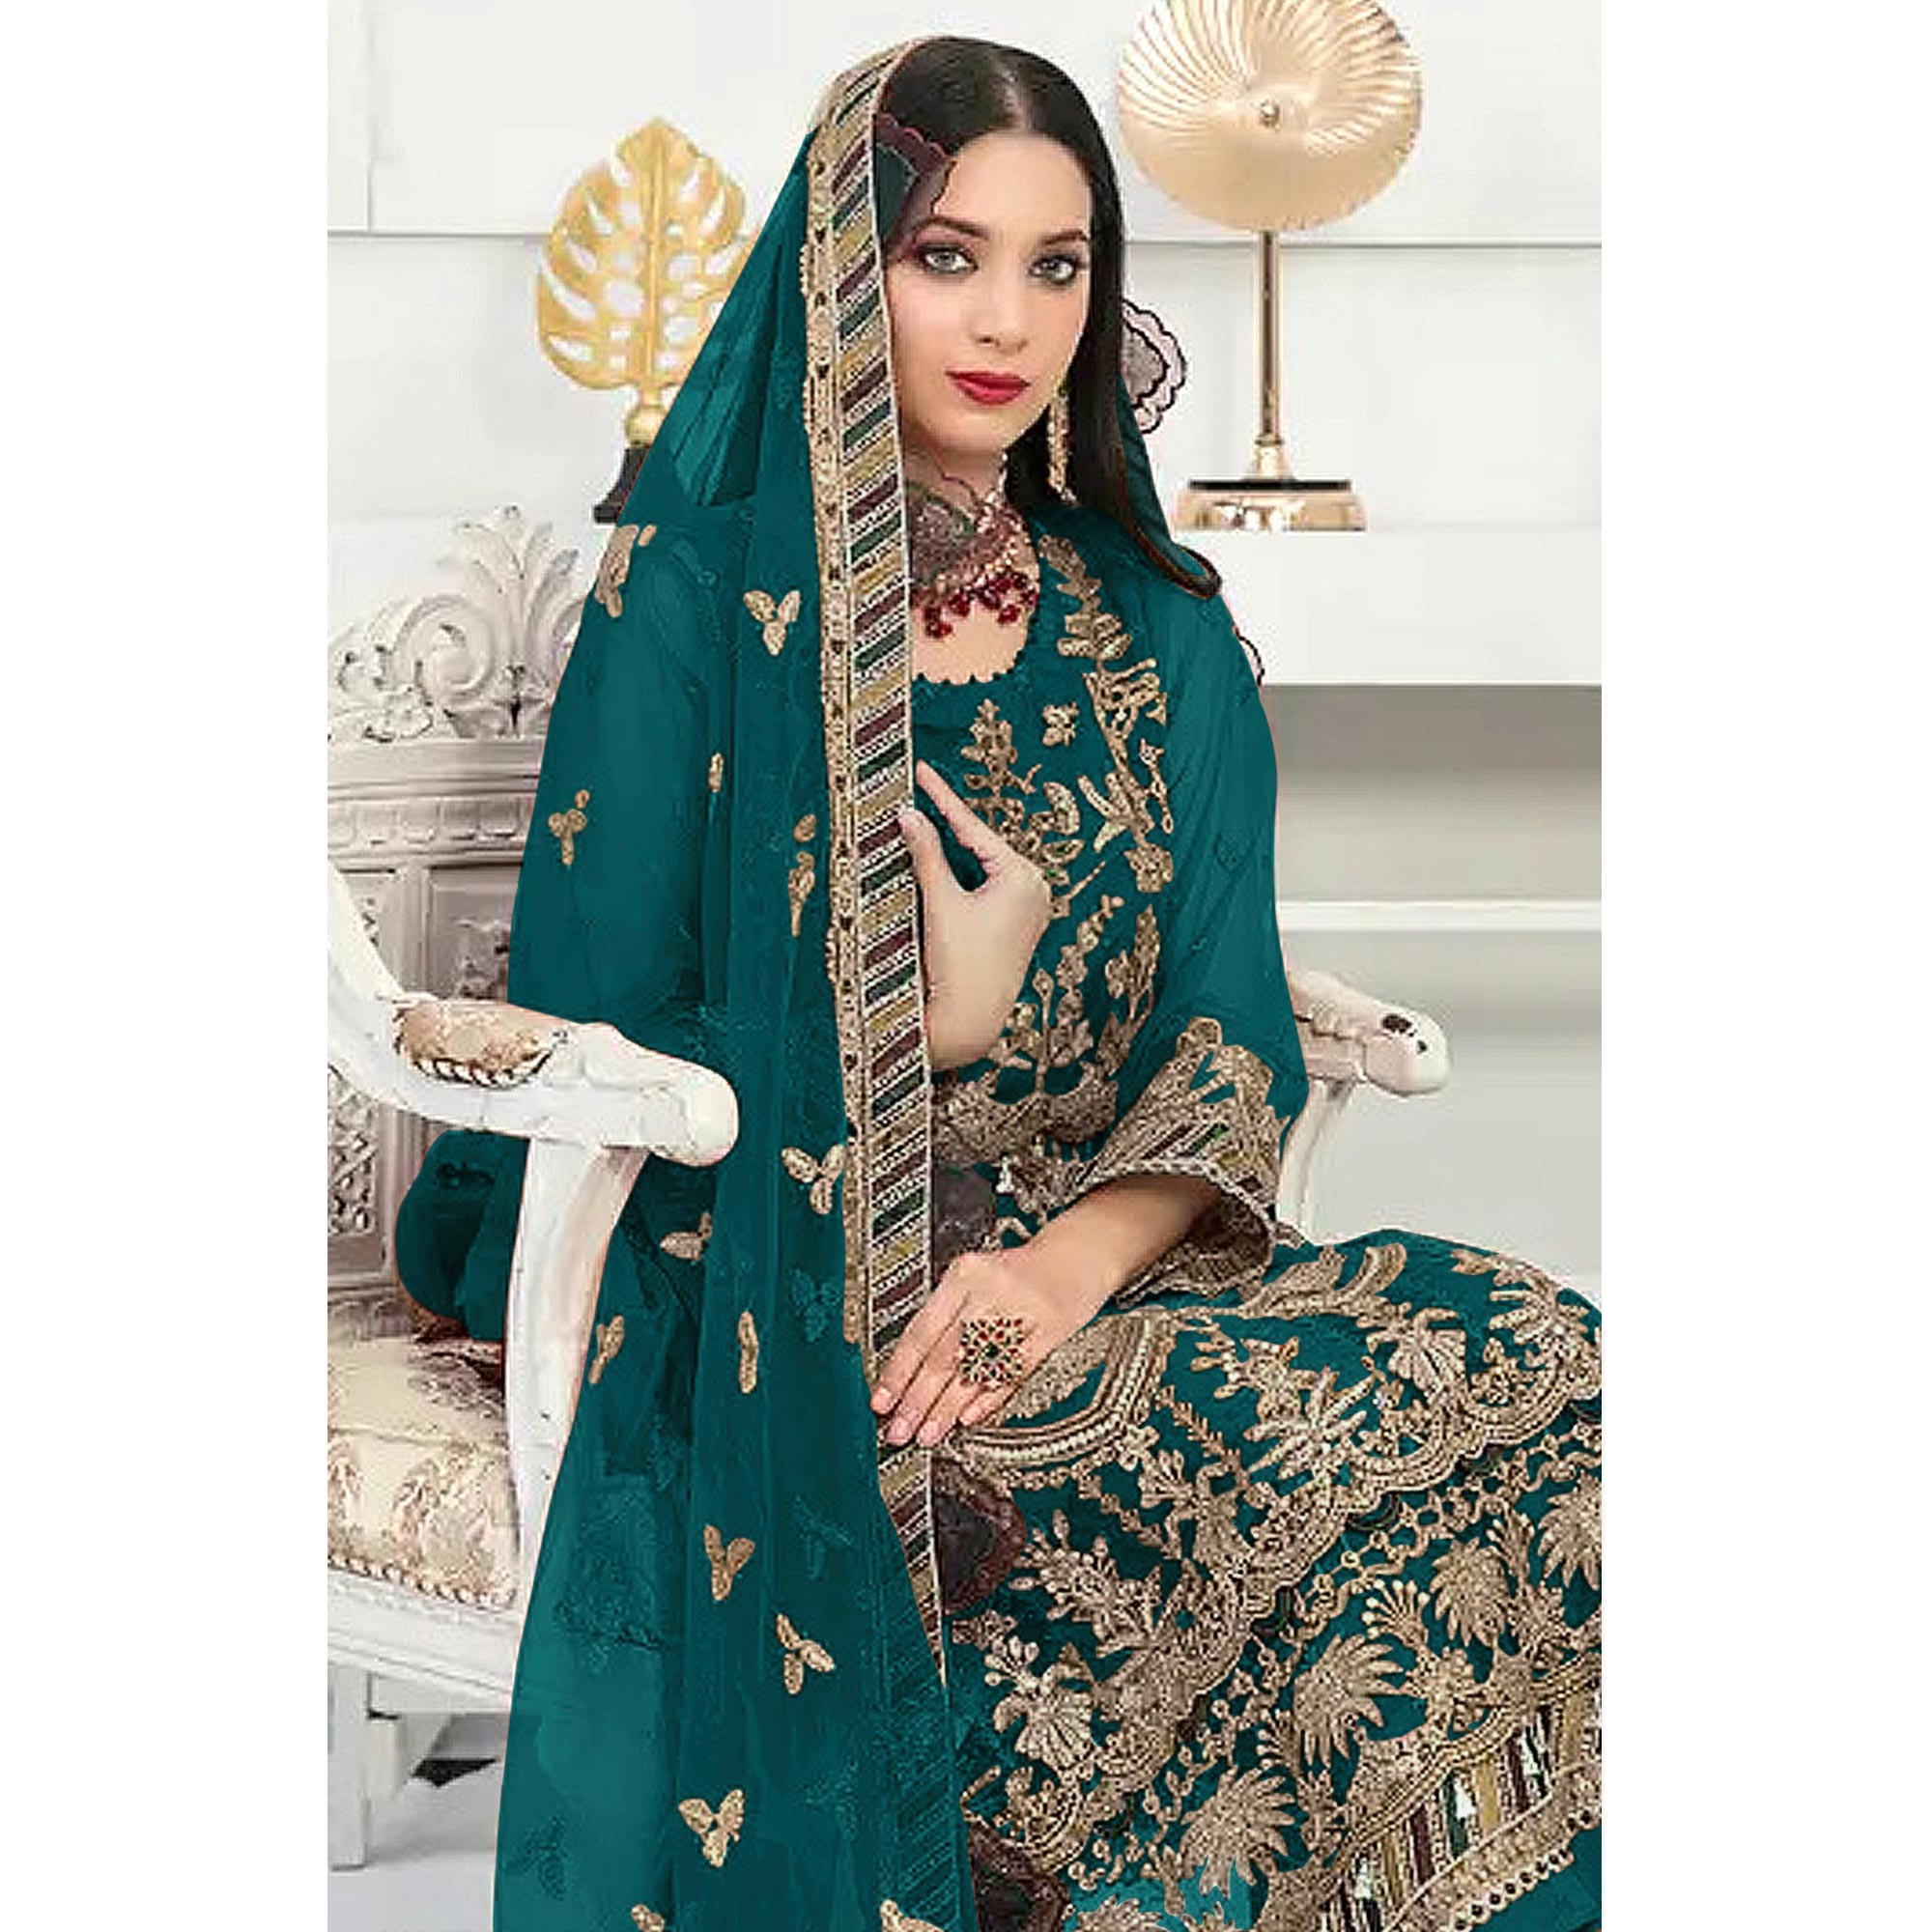 Teal Floral Embroidered Net Semi Stitched Pakistani Suit